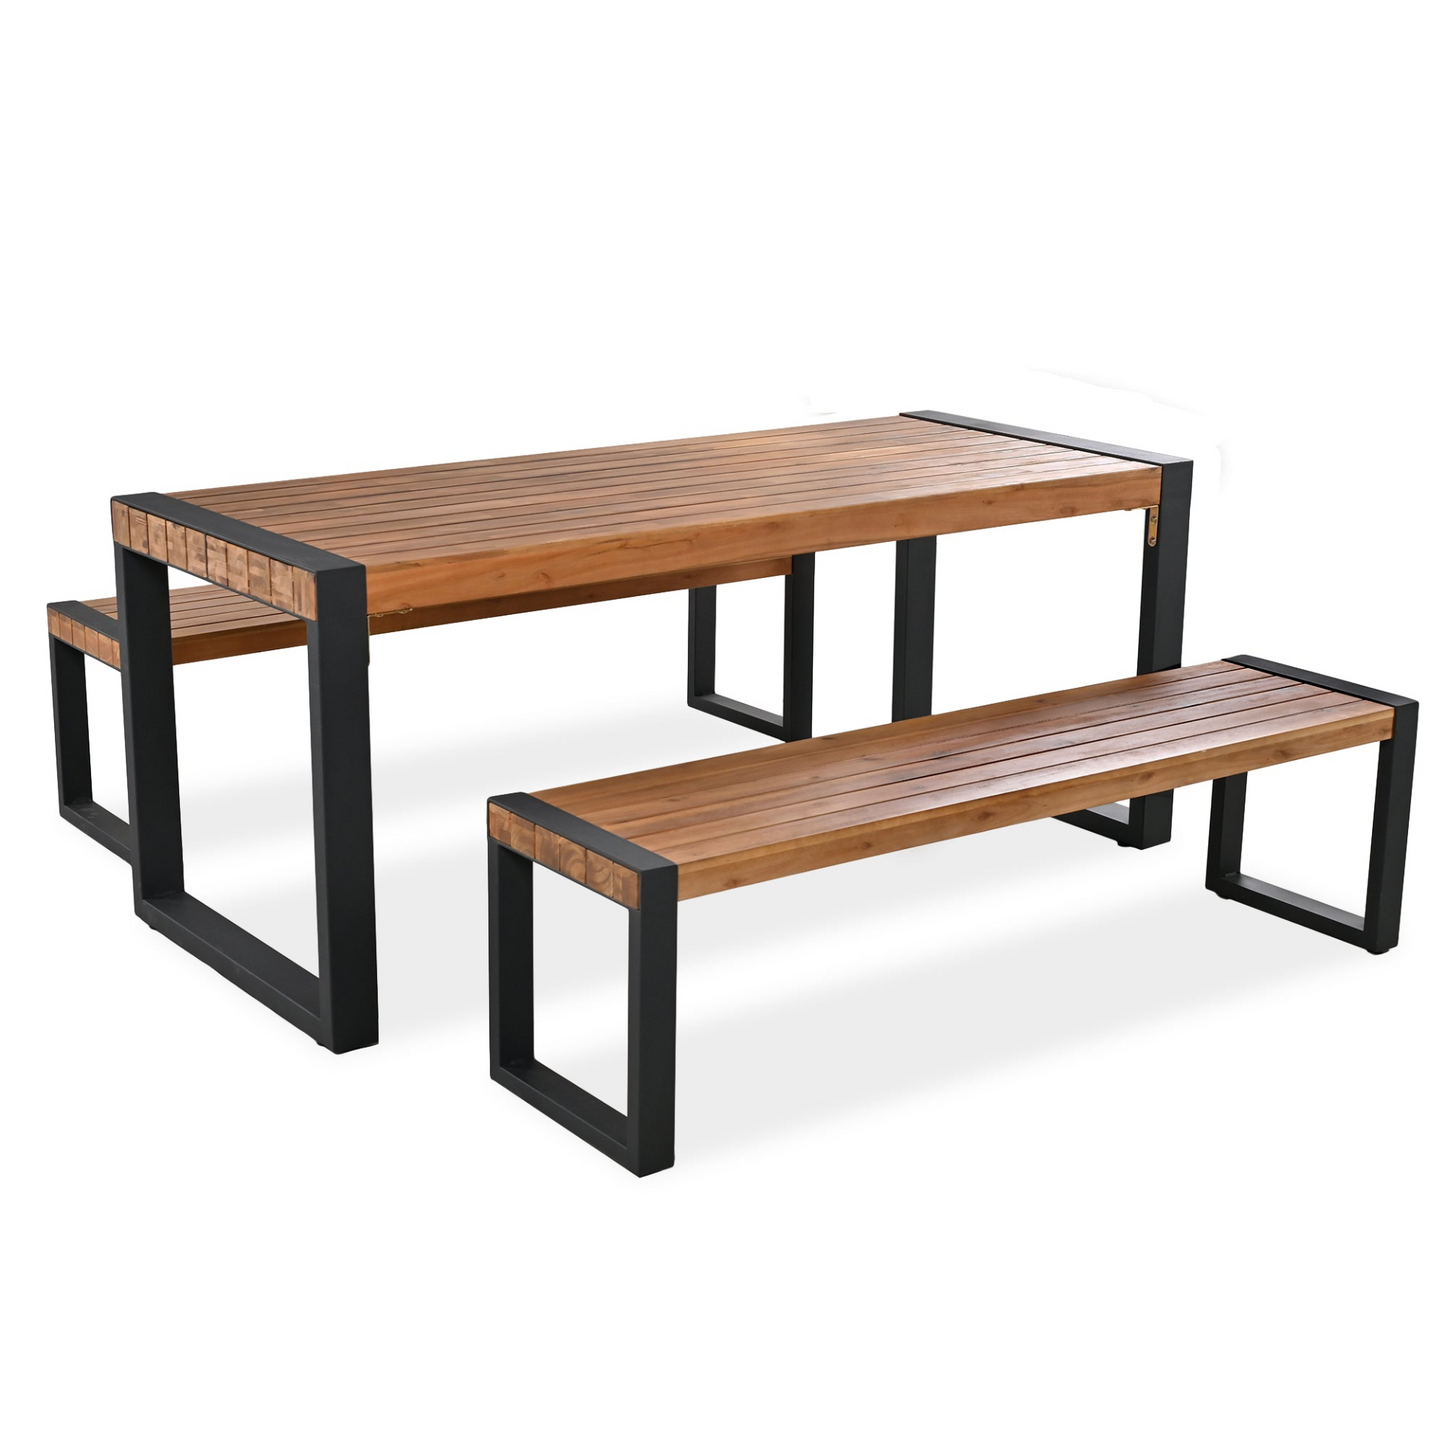 3-pieces Outdoor Dining Table With 2 Benches, Patio Dining Set With Unique Top Texture, Acacia Wood Top & Steel Frame, All Weather Use, For Outdoor & Indoor, Natural